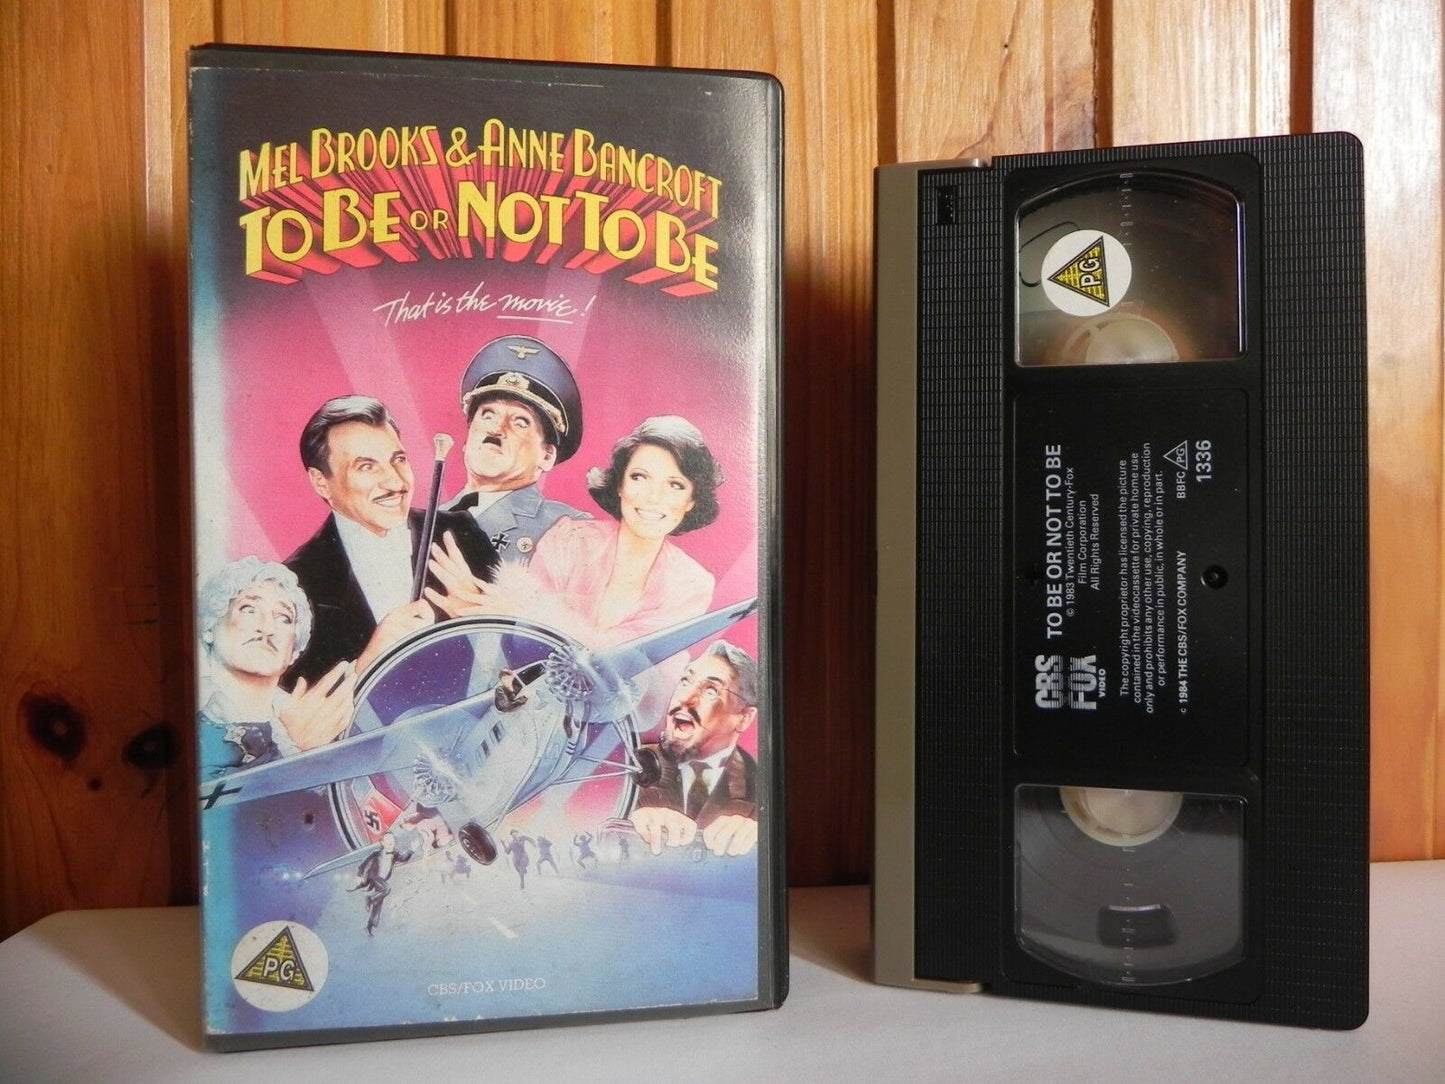 To Be Or Not To Be - CBS/FOX - Comedy - Pre-cert - Mel Brooks - Pal VHS-